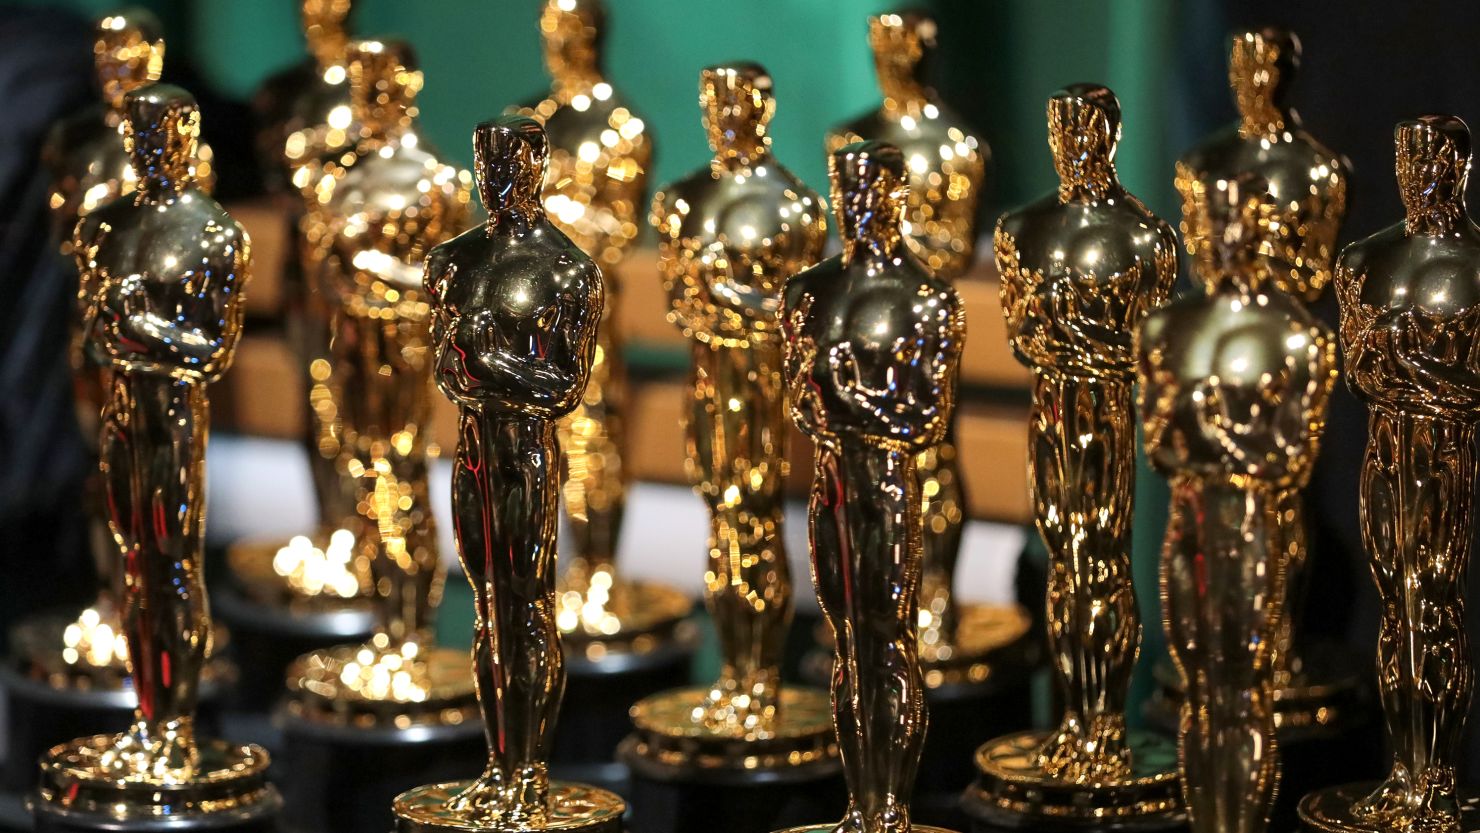 Oscar statuettes on display backstage during the 2023 Academy Awards in Hollywood.